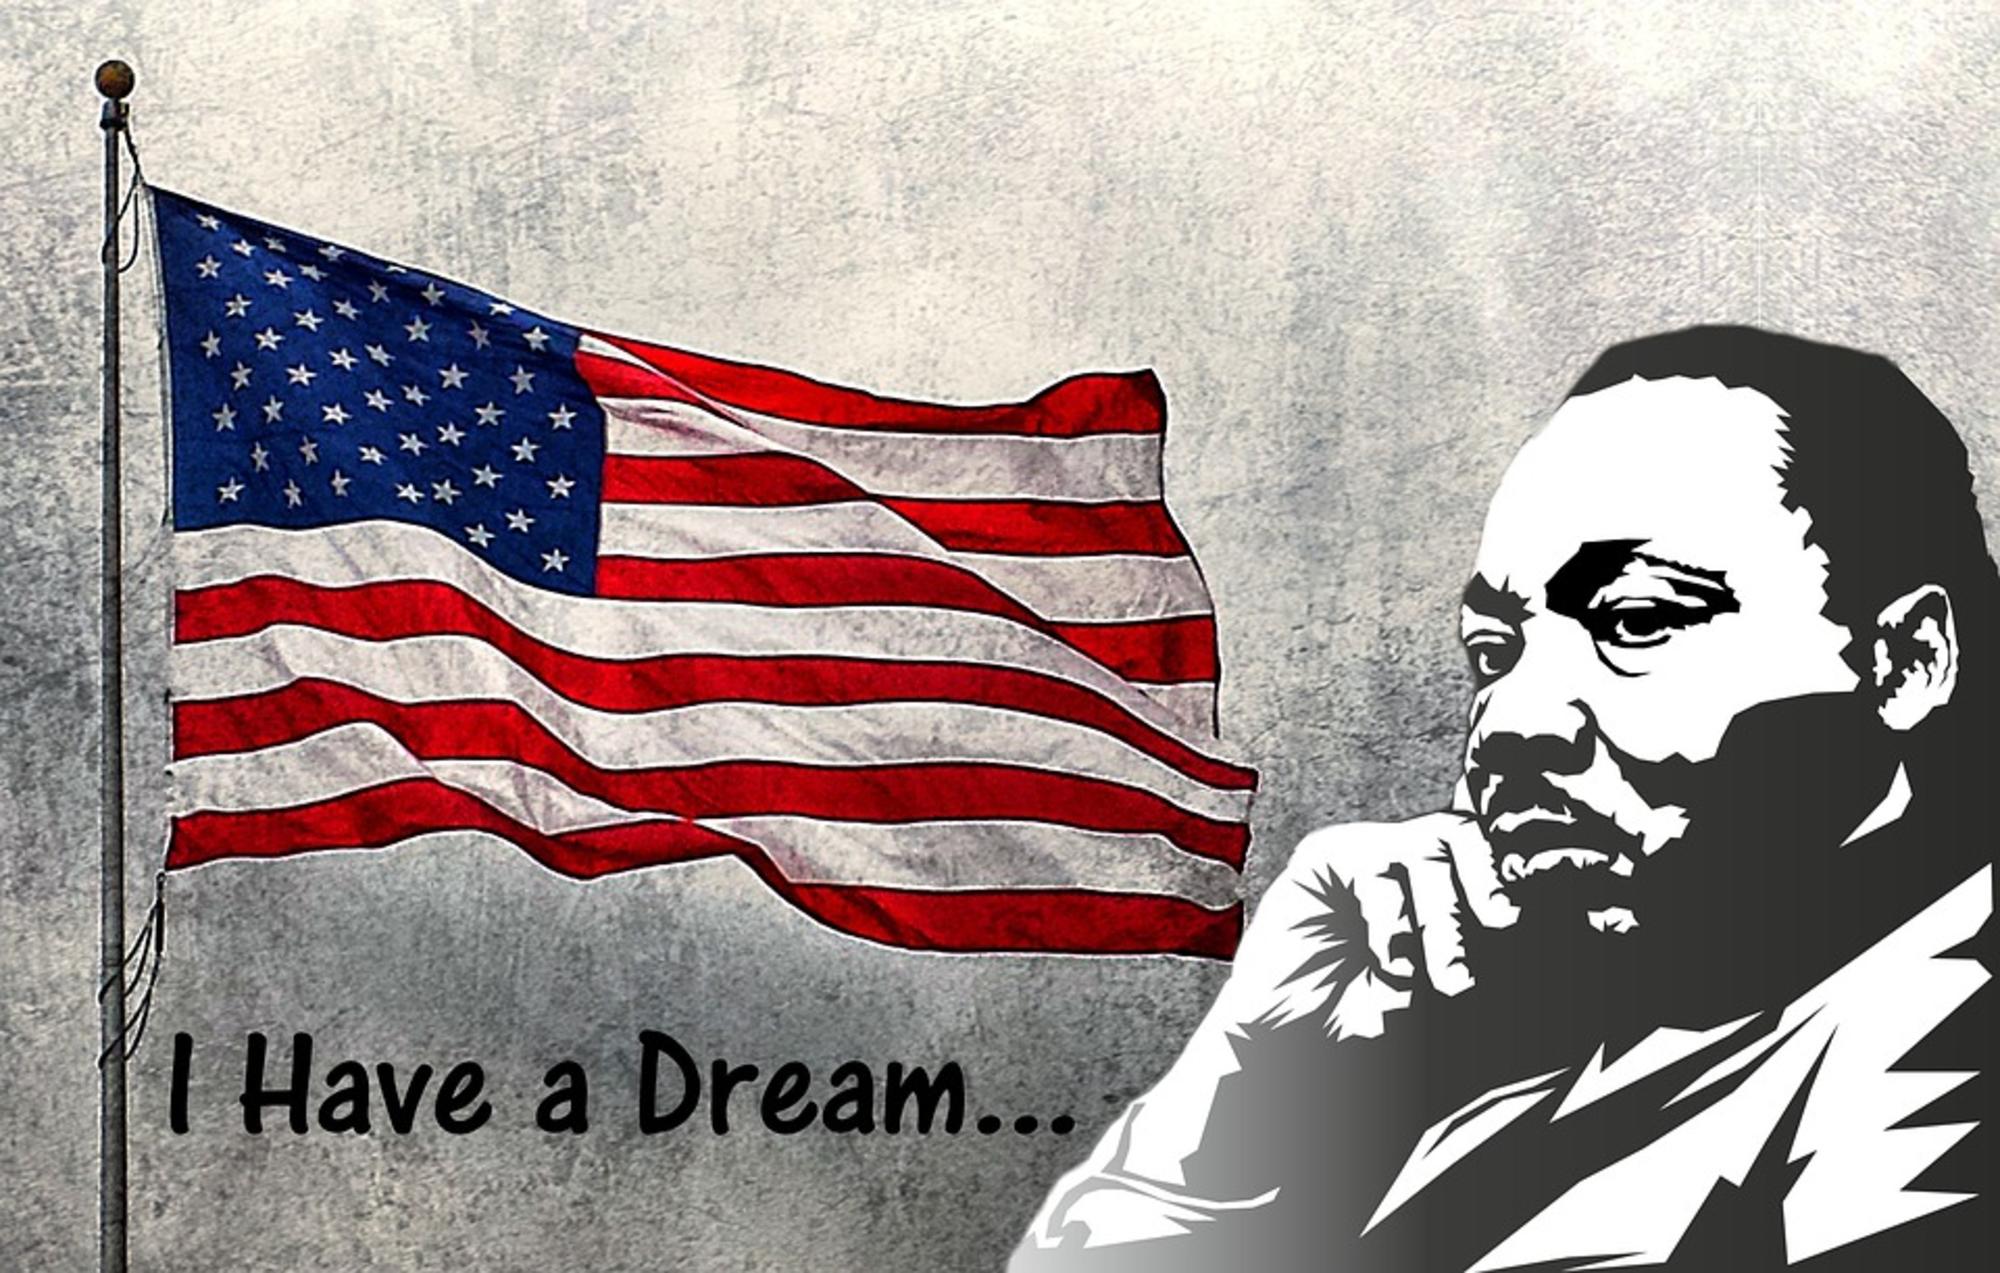 Martin Luther King (I have a dream)